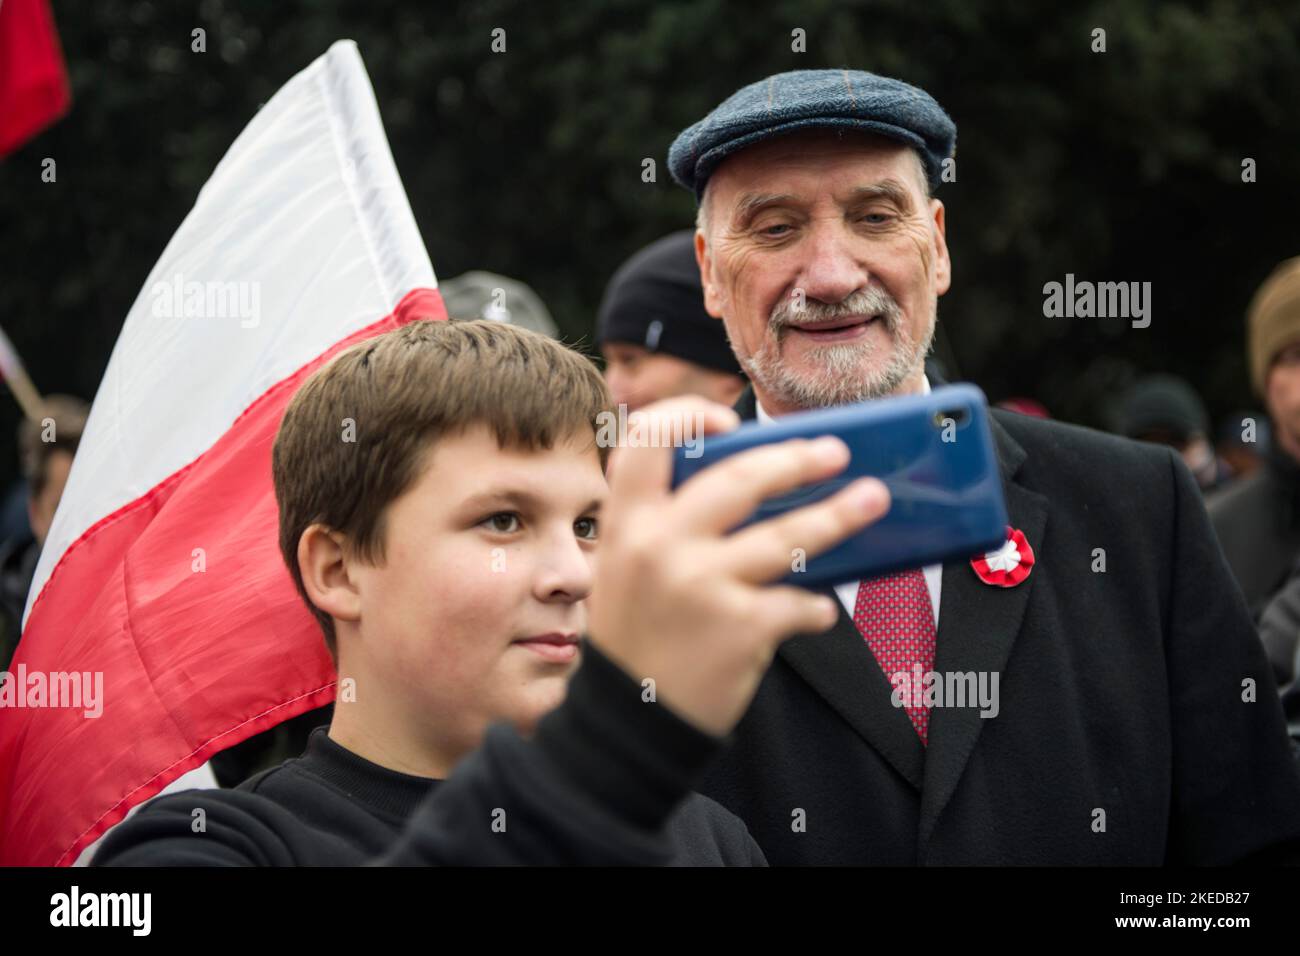 Antoni Macierewicz, former Minister of National Defense seen during the Independence March. Poland's National Independence Day marks the anniversary of the country's independence in 1918. It is celebrated as a nationwide holiday on November 11 each year. This year again tens of thousands of Poles took part in the Independence March in Warsaw organized by far-right organizations to celebrate the 104th anniversary of Poland's rebirth as an independent state. The slogan of the march was: 'Strong Nation, Great Poland!” (Silny Naród, Wielka Polska!). (Photo by Attila Husejnow/SOPA Images/Sipa USA Stock Photo